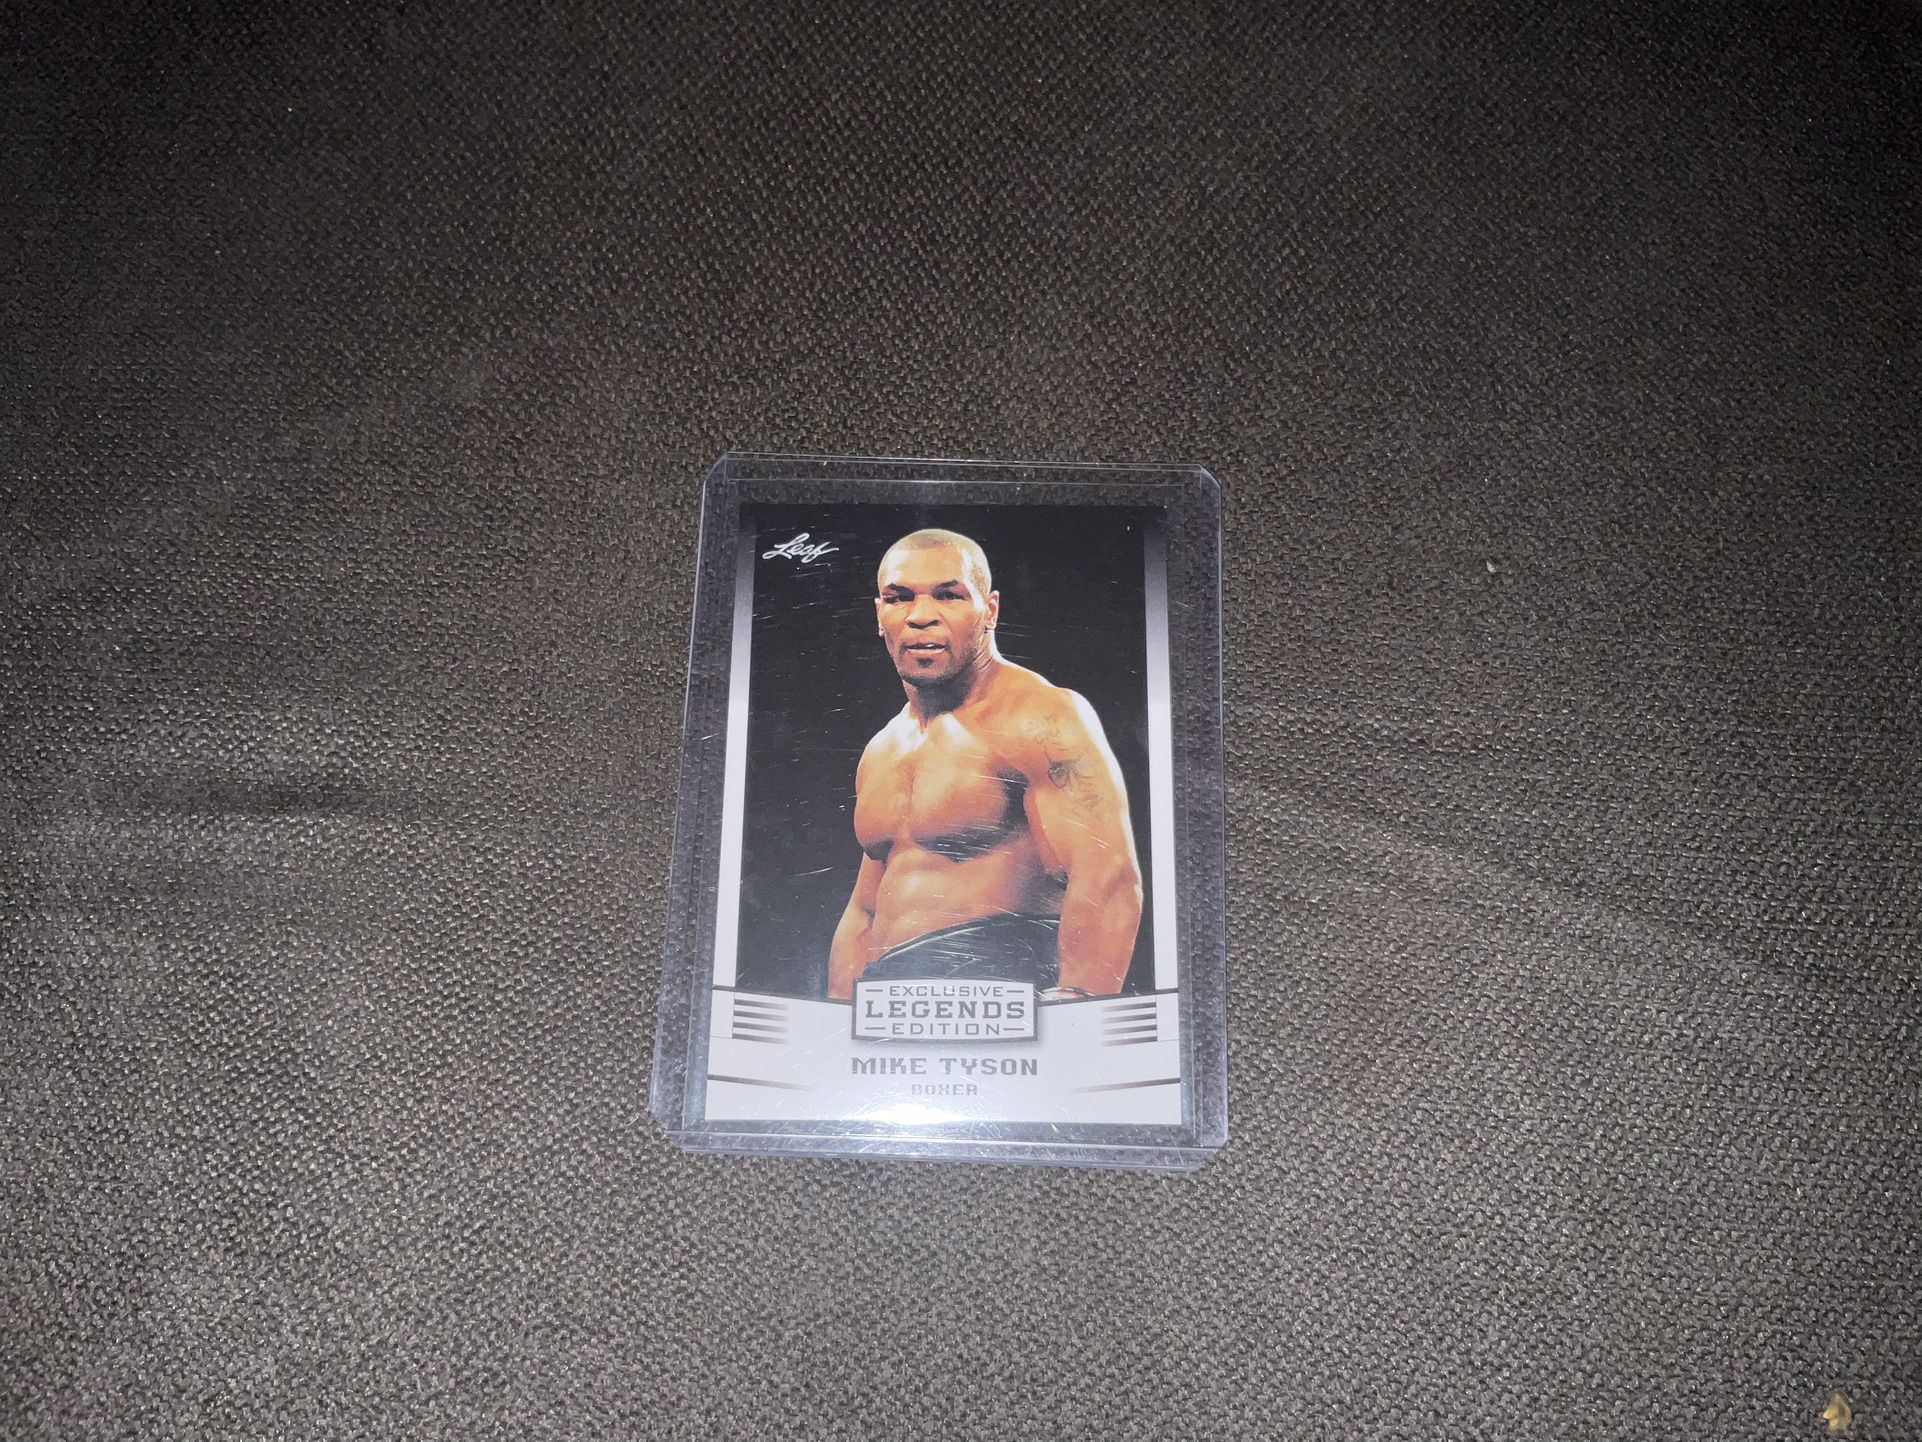 MIKE TYSON "LEGENDS EDITION" LEAF BOXING CARD #EE -08 Iron Mike Mint New Sealed 